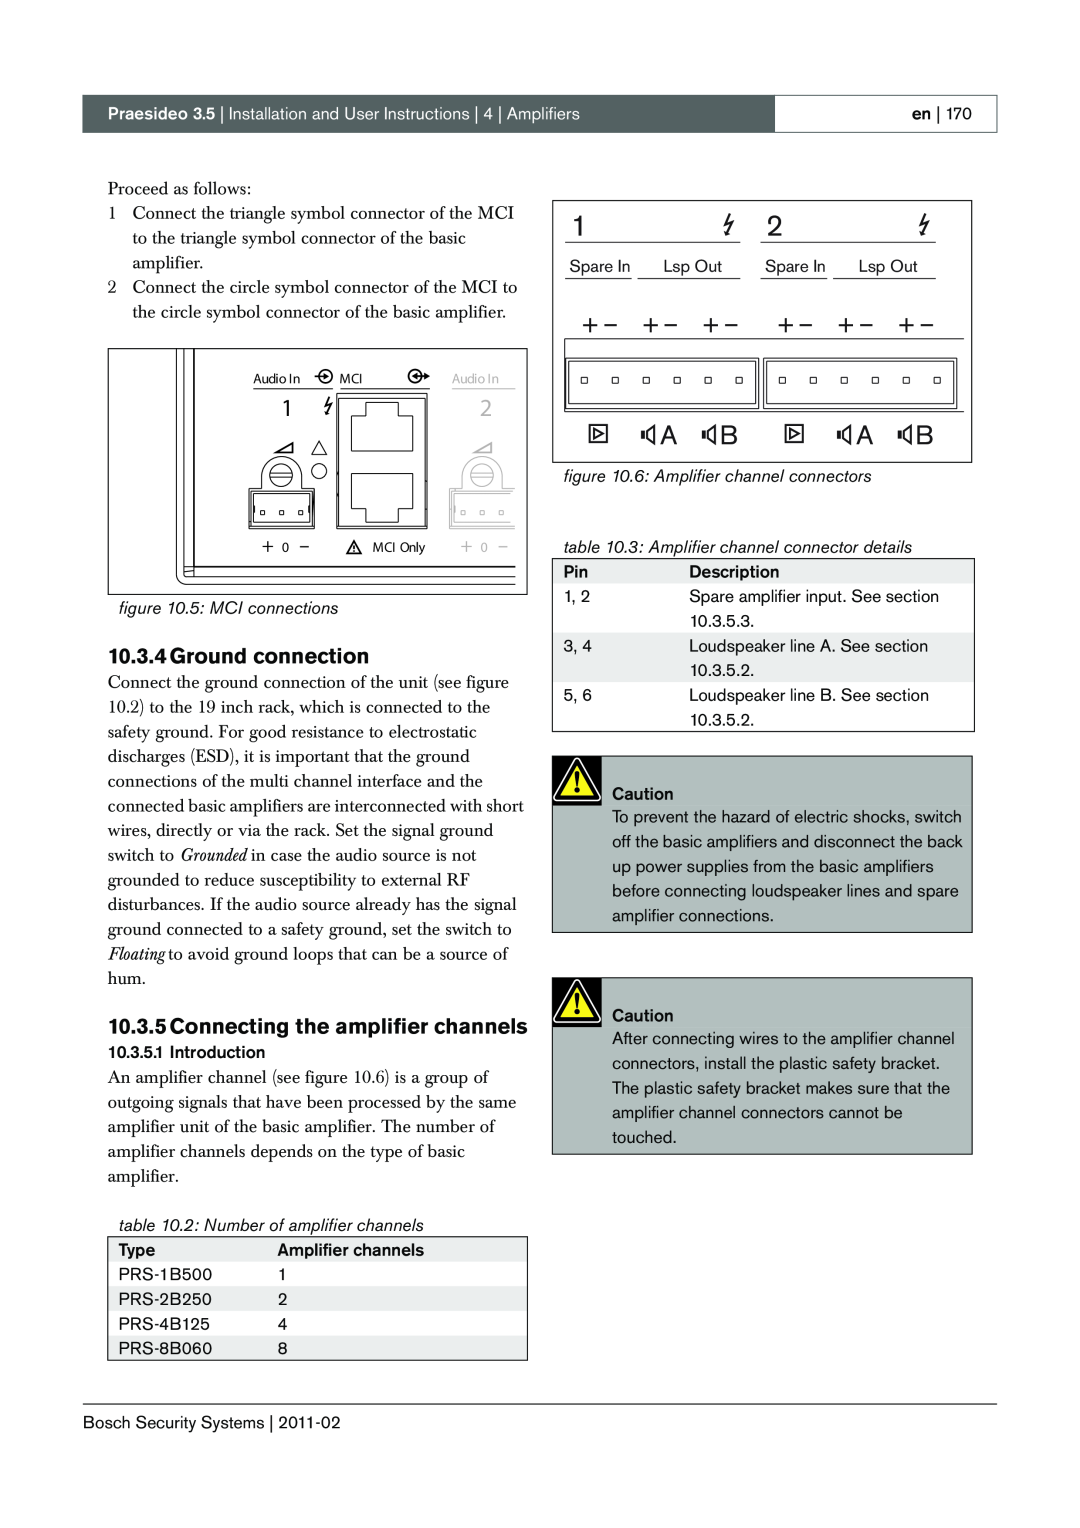 Bosch Appliances 3.5 manual + – + – + – + – + – +, Ground connection, Connecting the amplifier channels, 5: MCI connections 